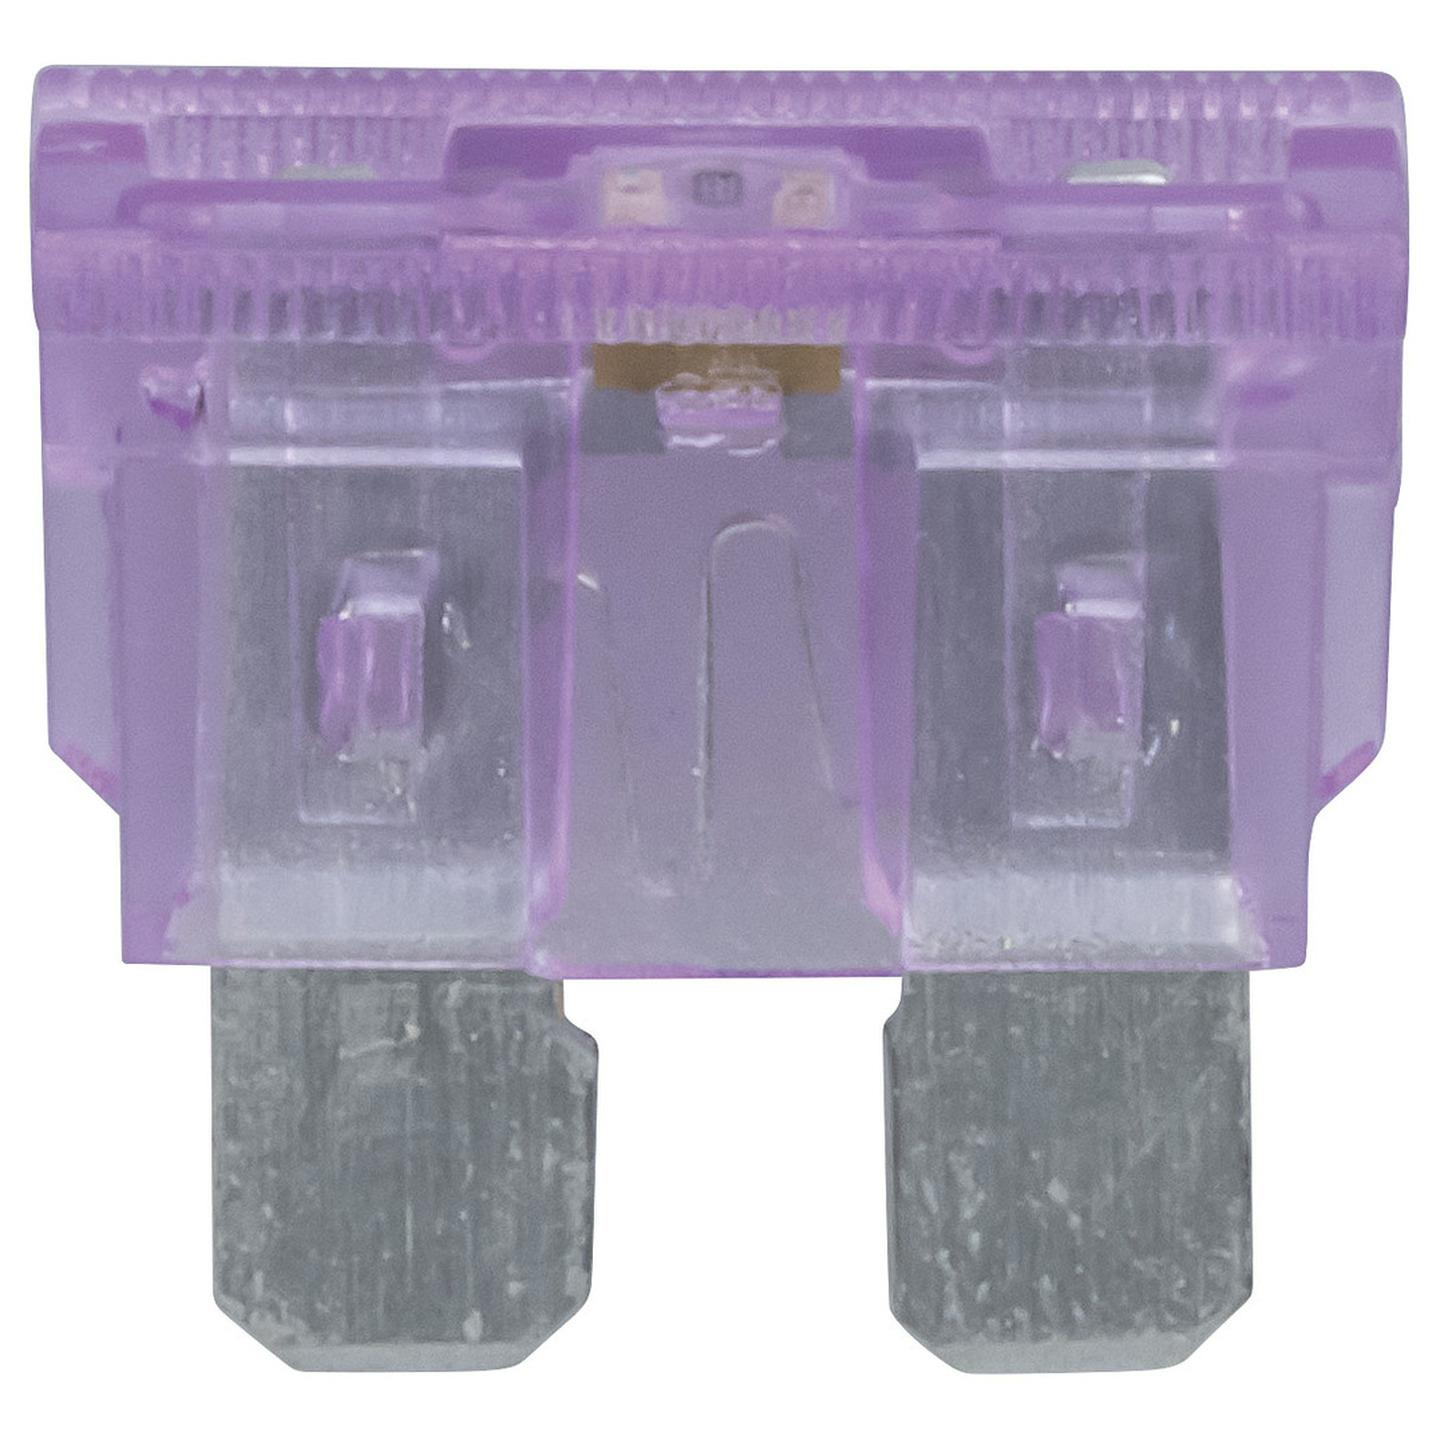 3A Pink Standard Blade Fuse with LED Indicator